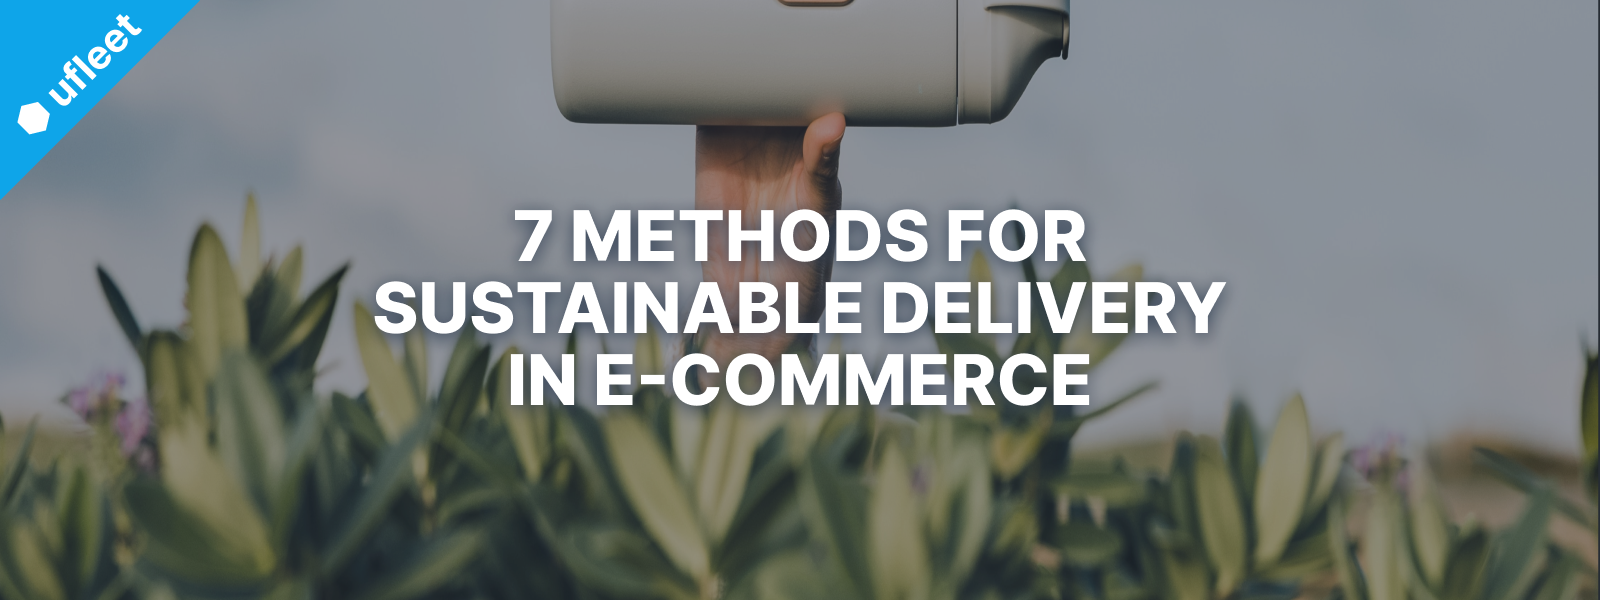 sustainable delivery in e-commerce